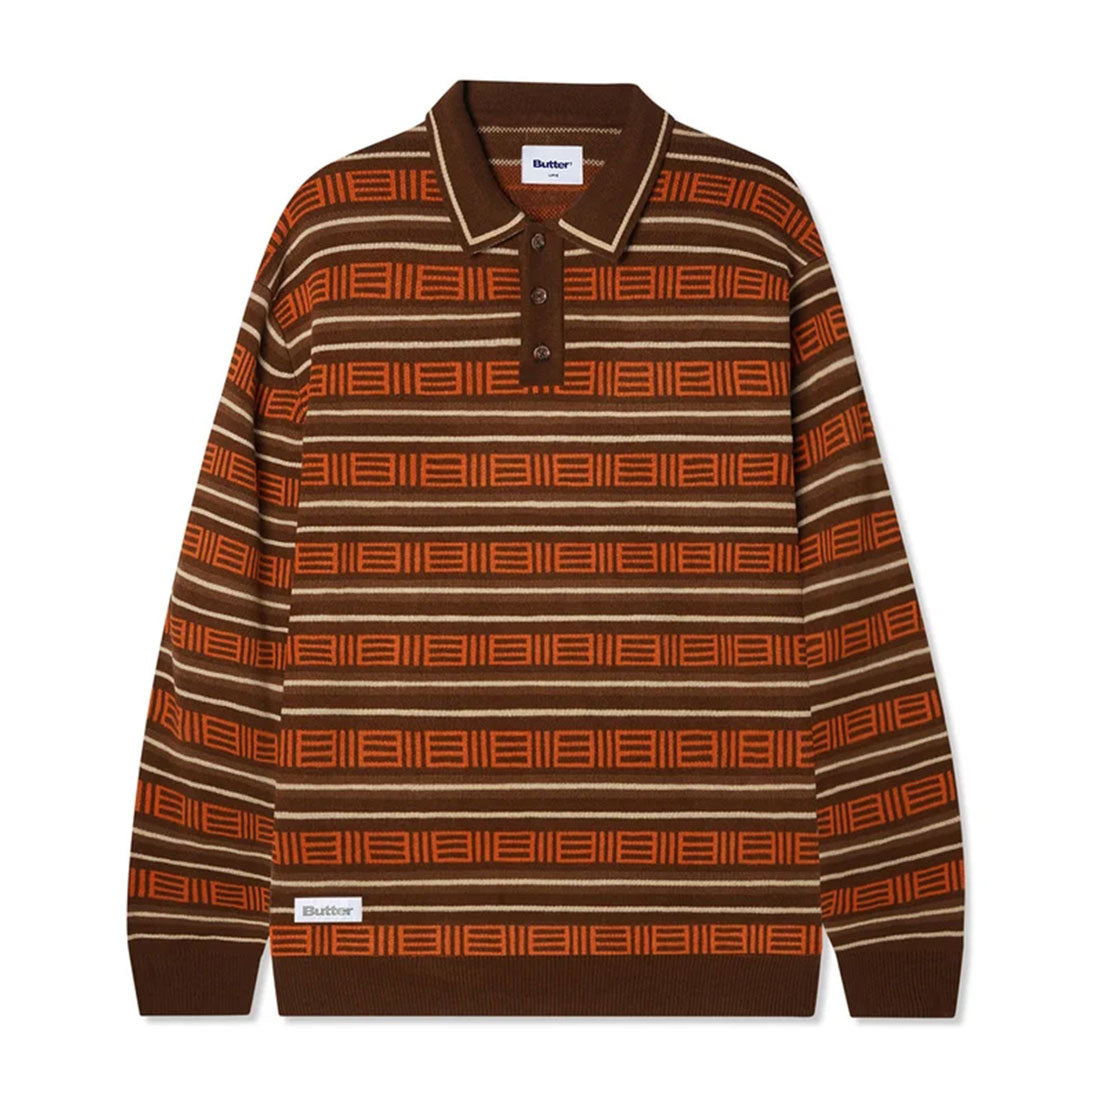 Butter Goods Sweater - Windsor Knitted Sweater-Brown